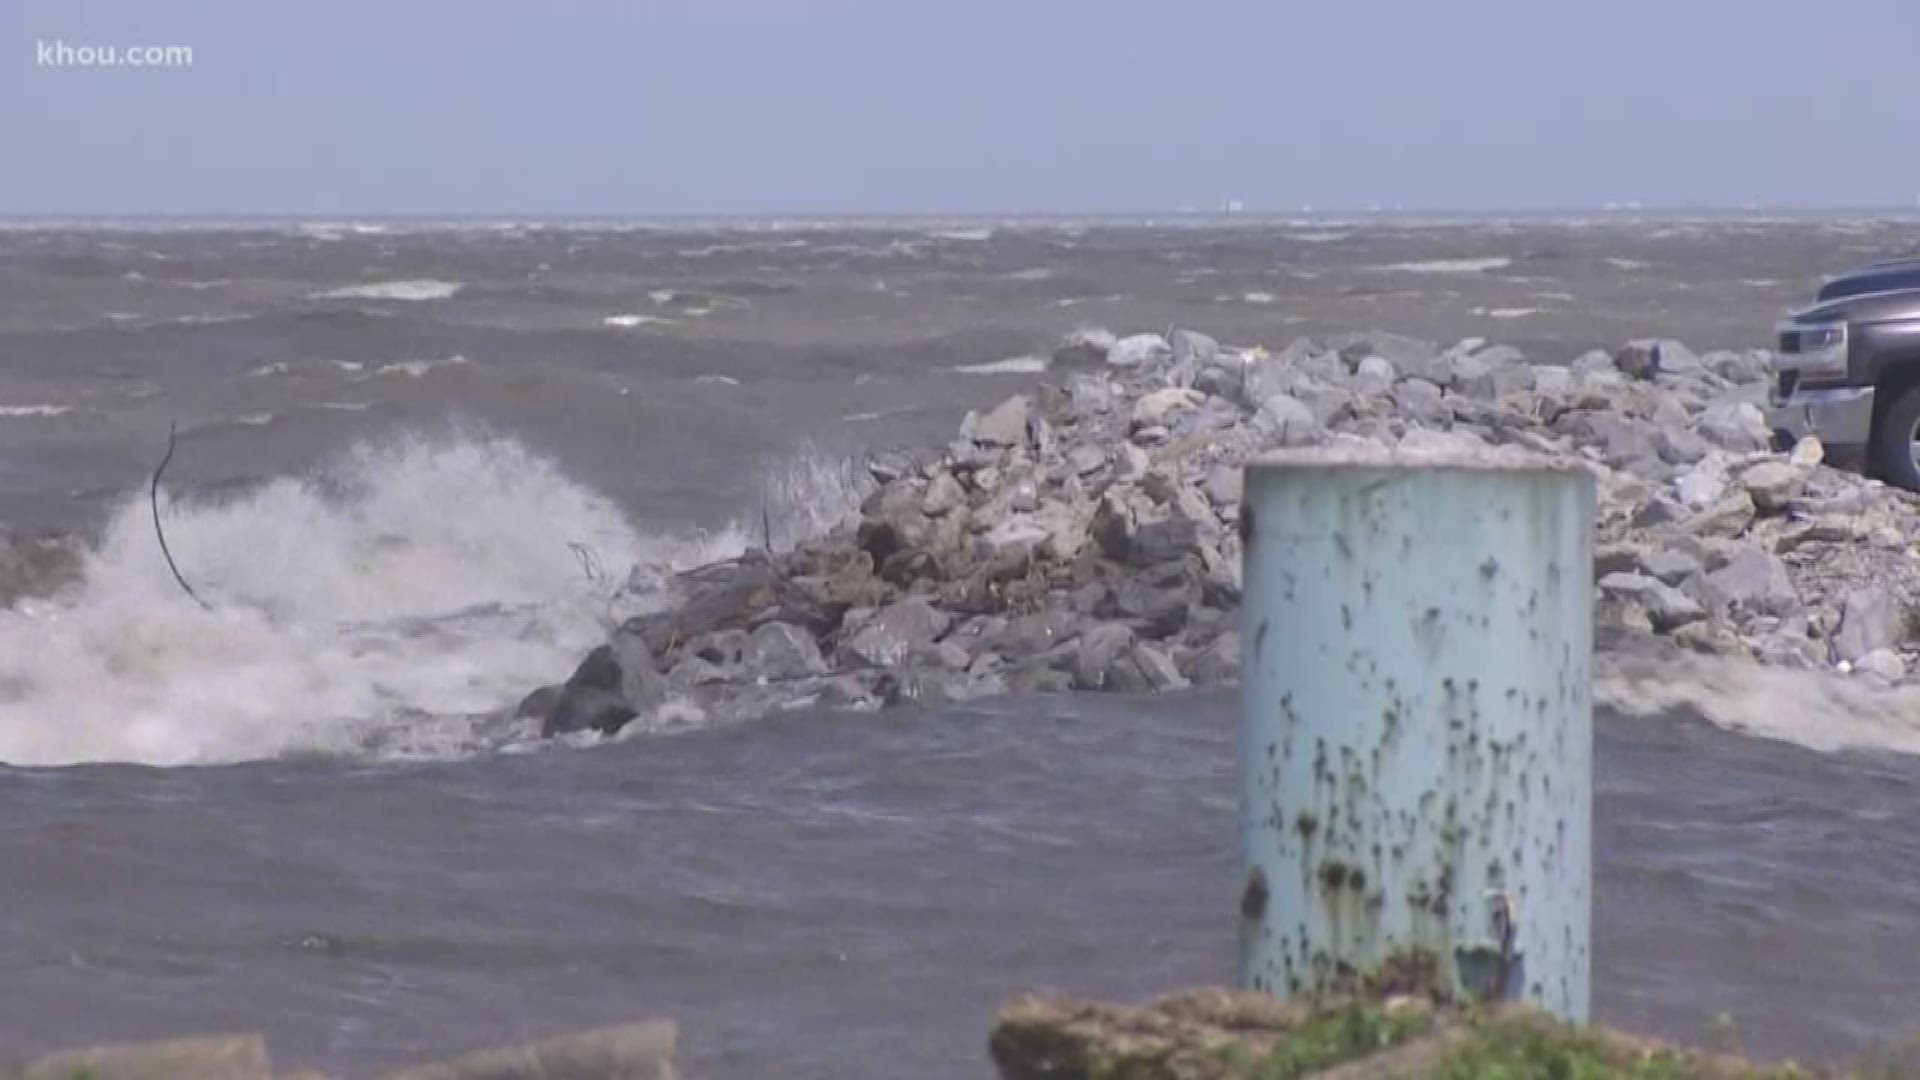 Louisiana residents are preparing for Tropical Storm Barry's landfall. KHOU 11 reporter Brett Buffington reports from New Orleans.